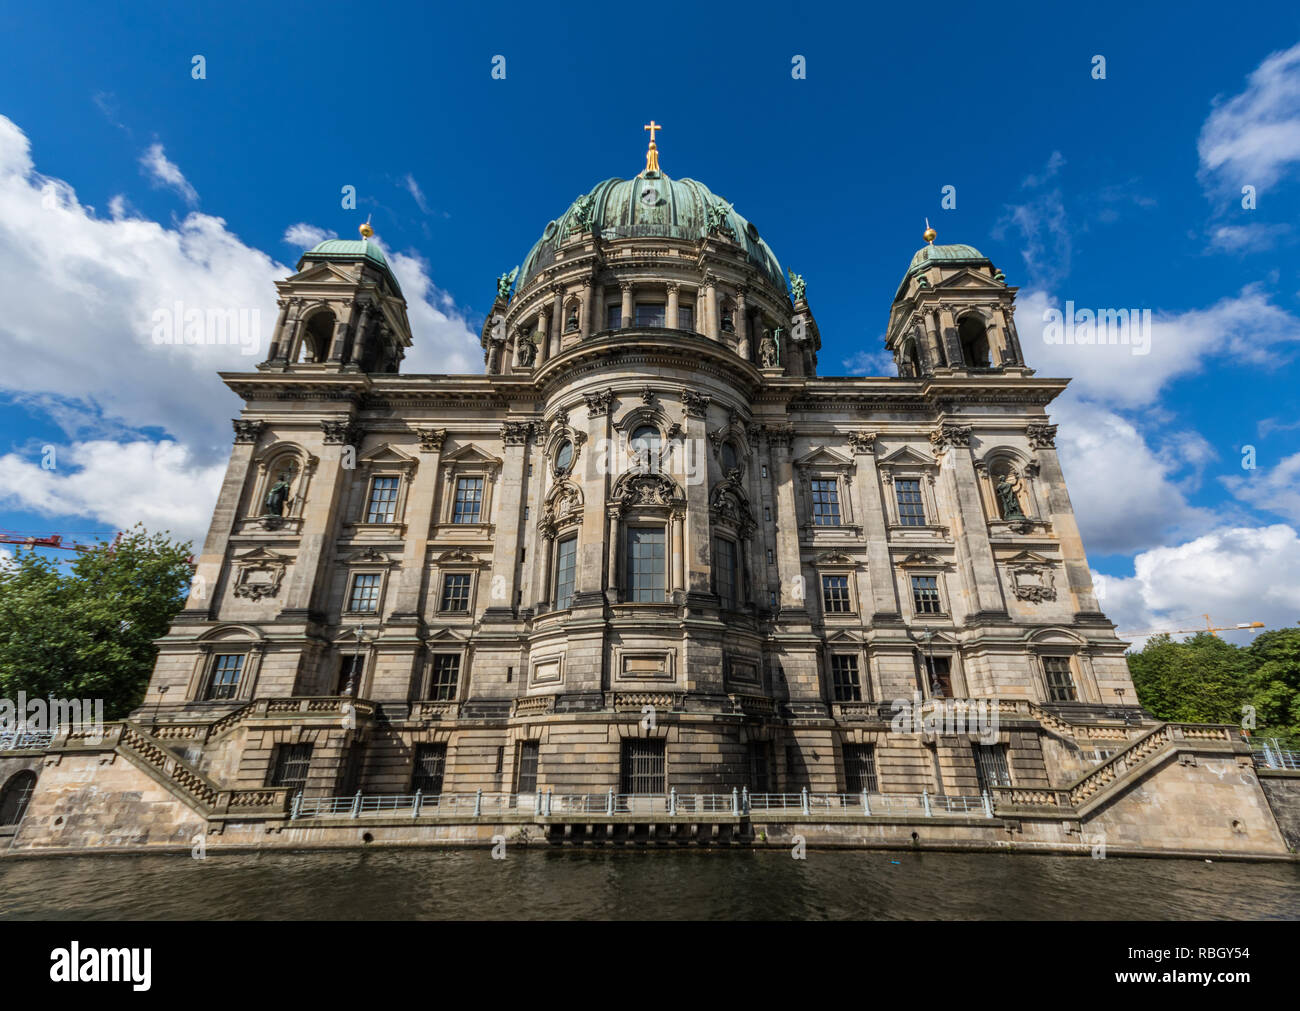 Berlin, Germany - completed in 1905 and built in a Historicist architecture style, the the Berlin Cathedral it's one of the main landmarks in town Stock Photo